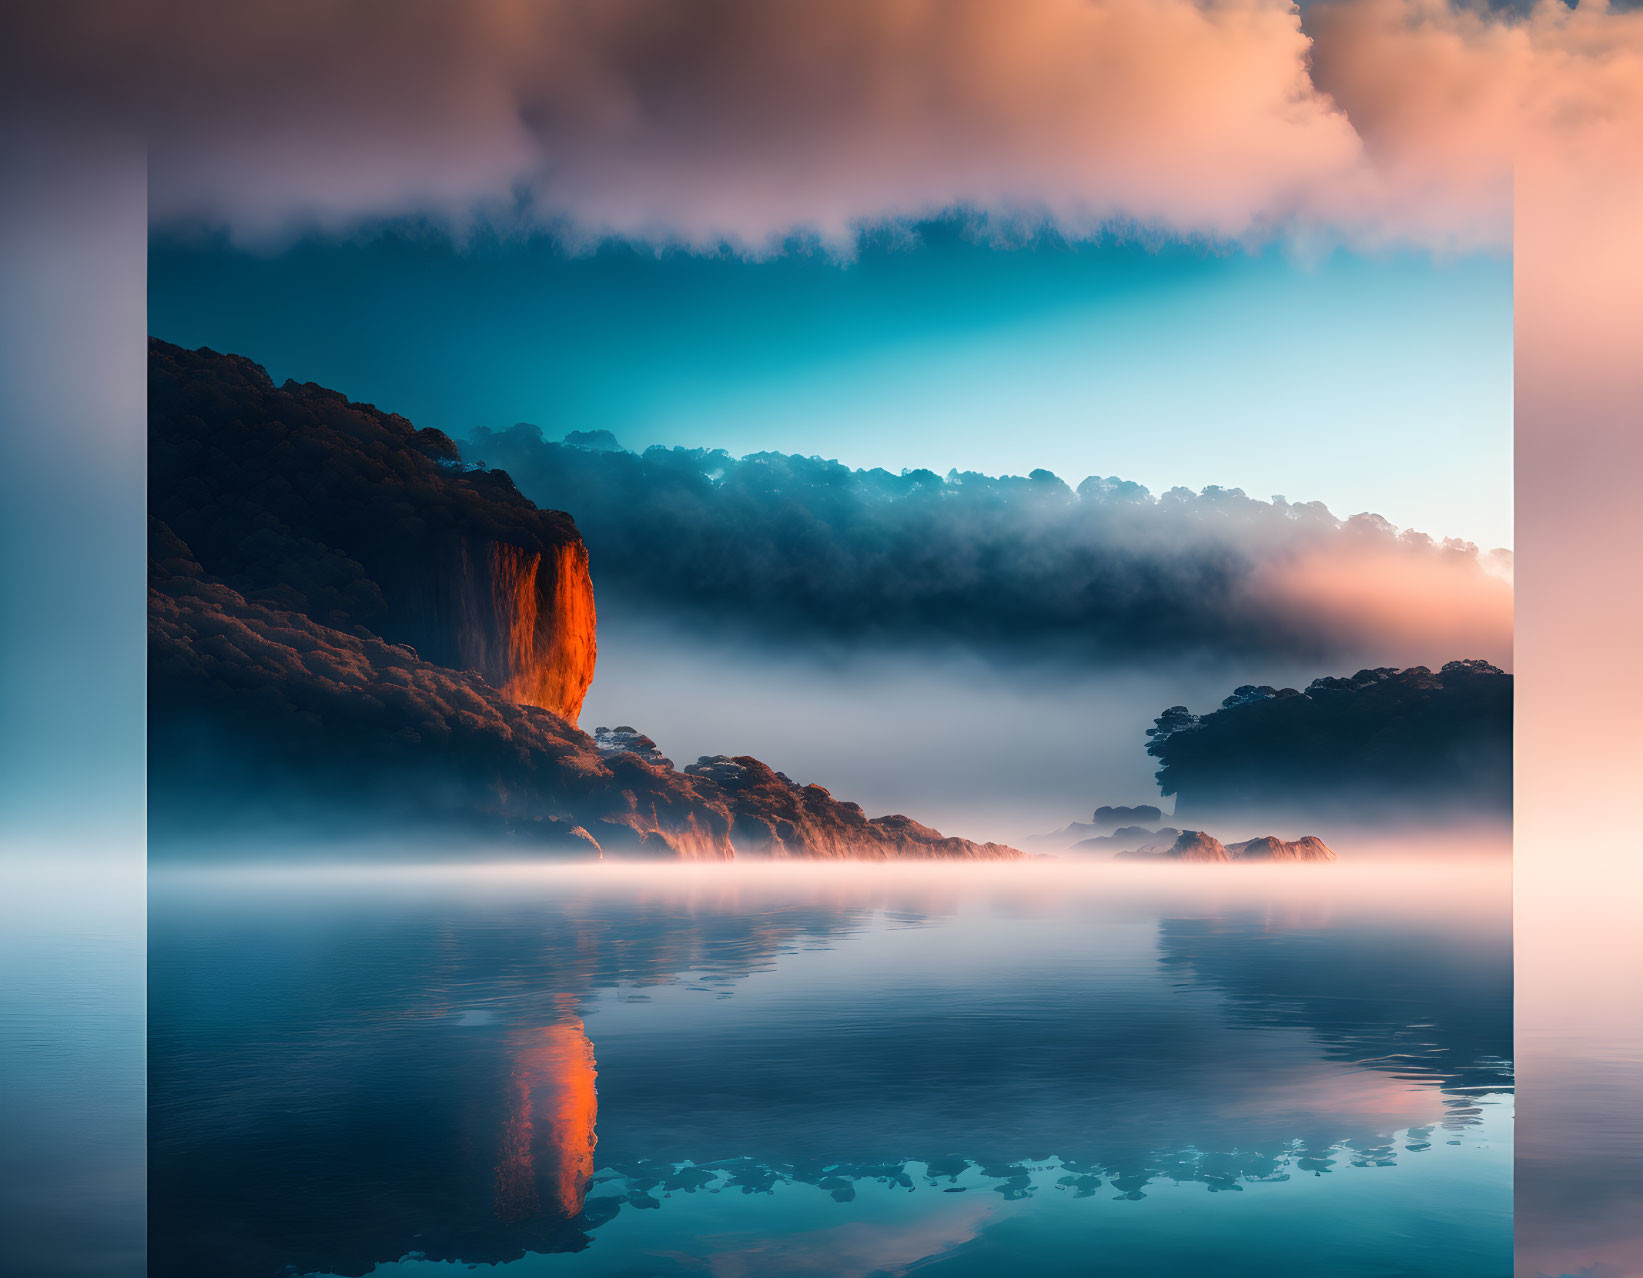 Tranquil dawn landscape with misty lake, lush forest, and vibrant sky